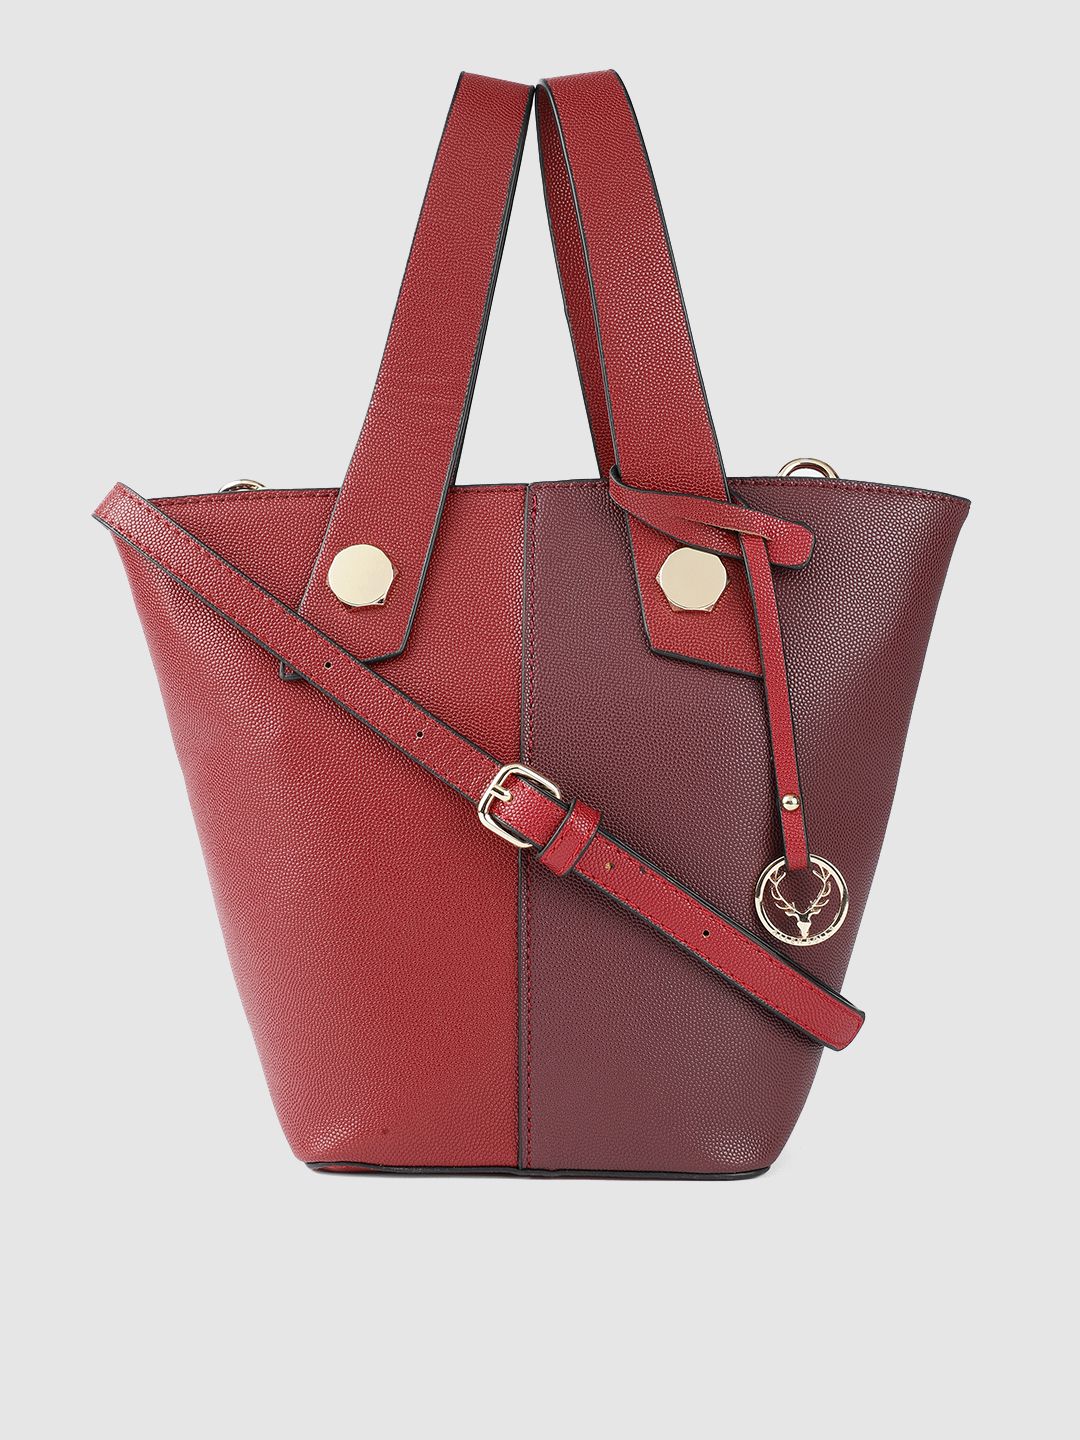 Allen Solly Red Colourblocked Structured Handheld Bag Price in India